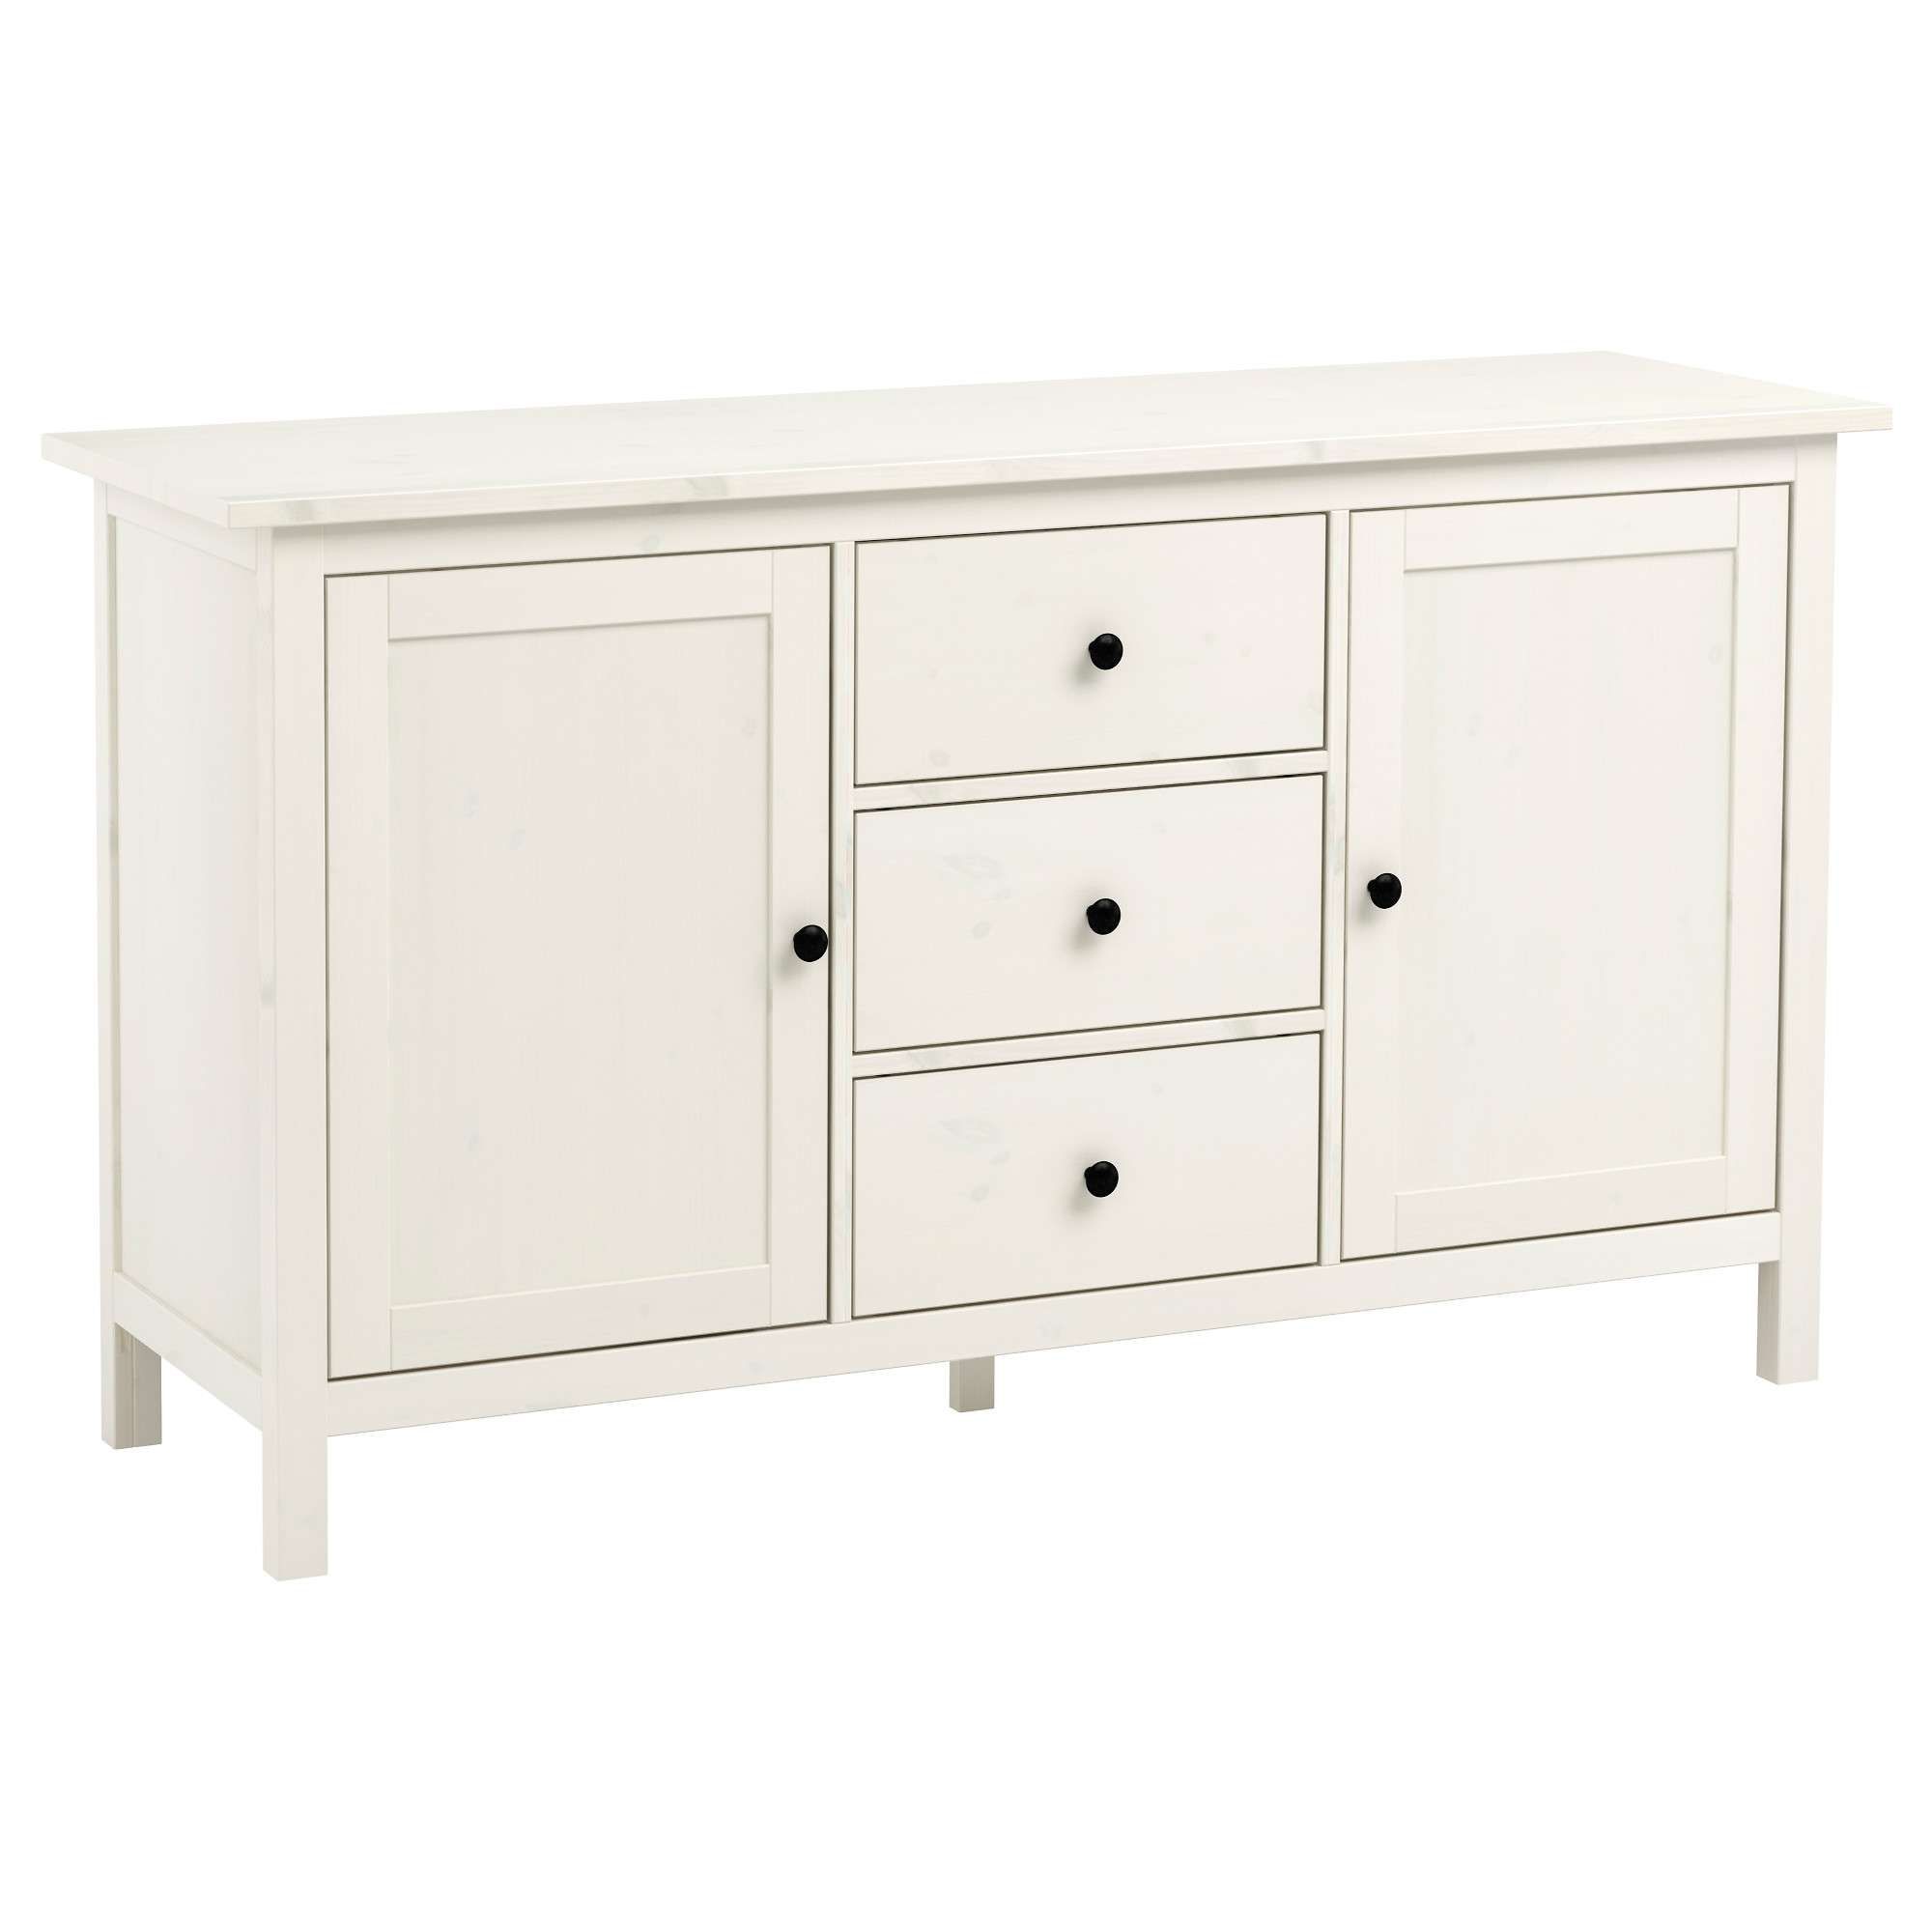 Hemnes Sideboard – White Stain – Ikea With Shallow Sideboards (View 7 of 20)